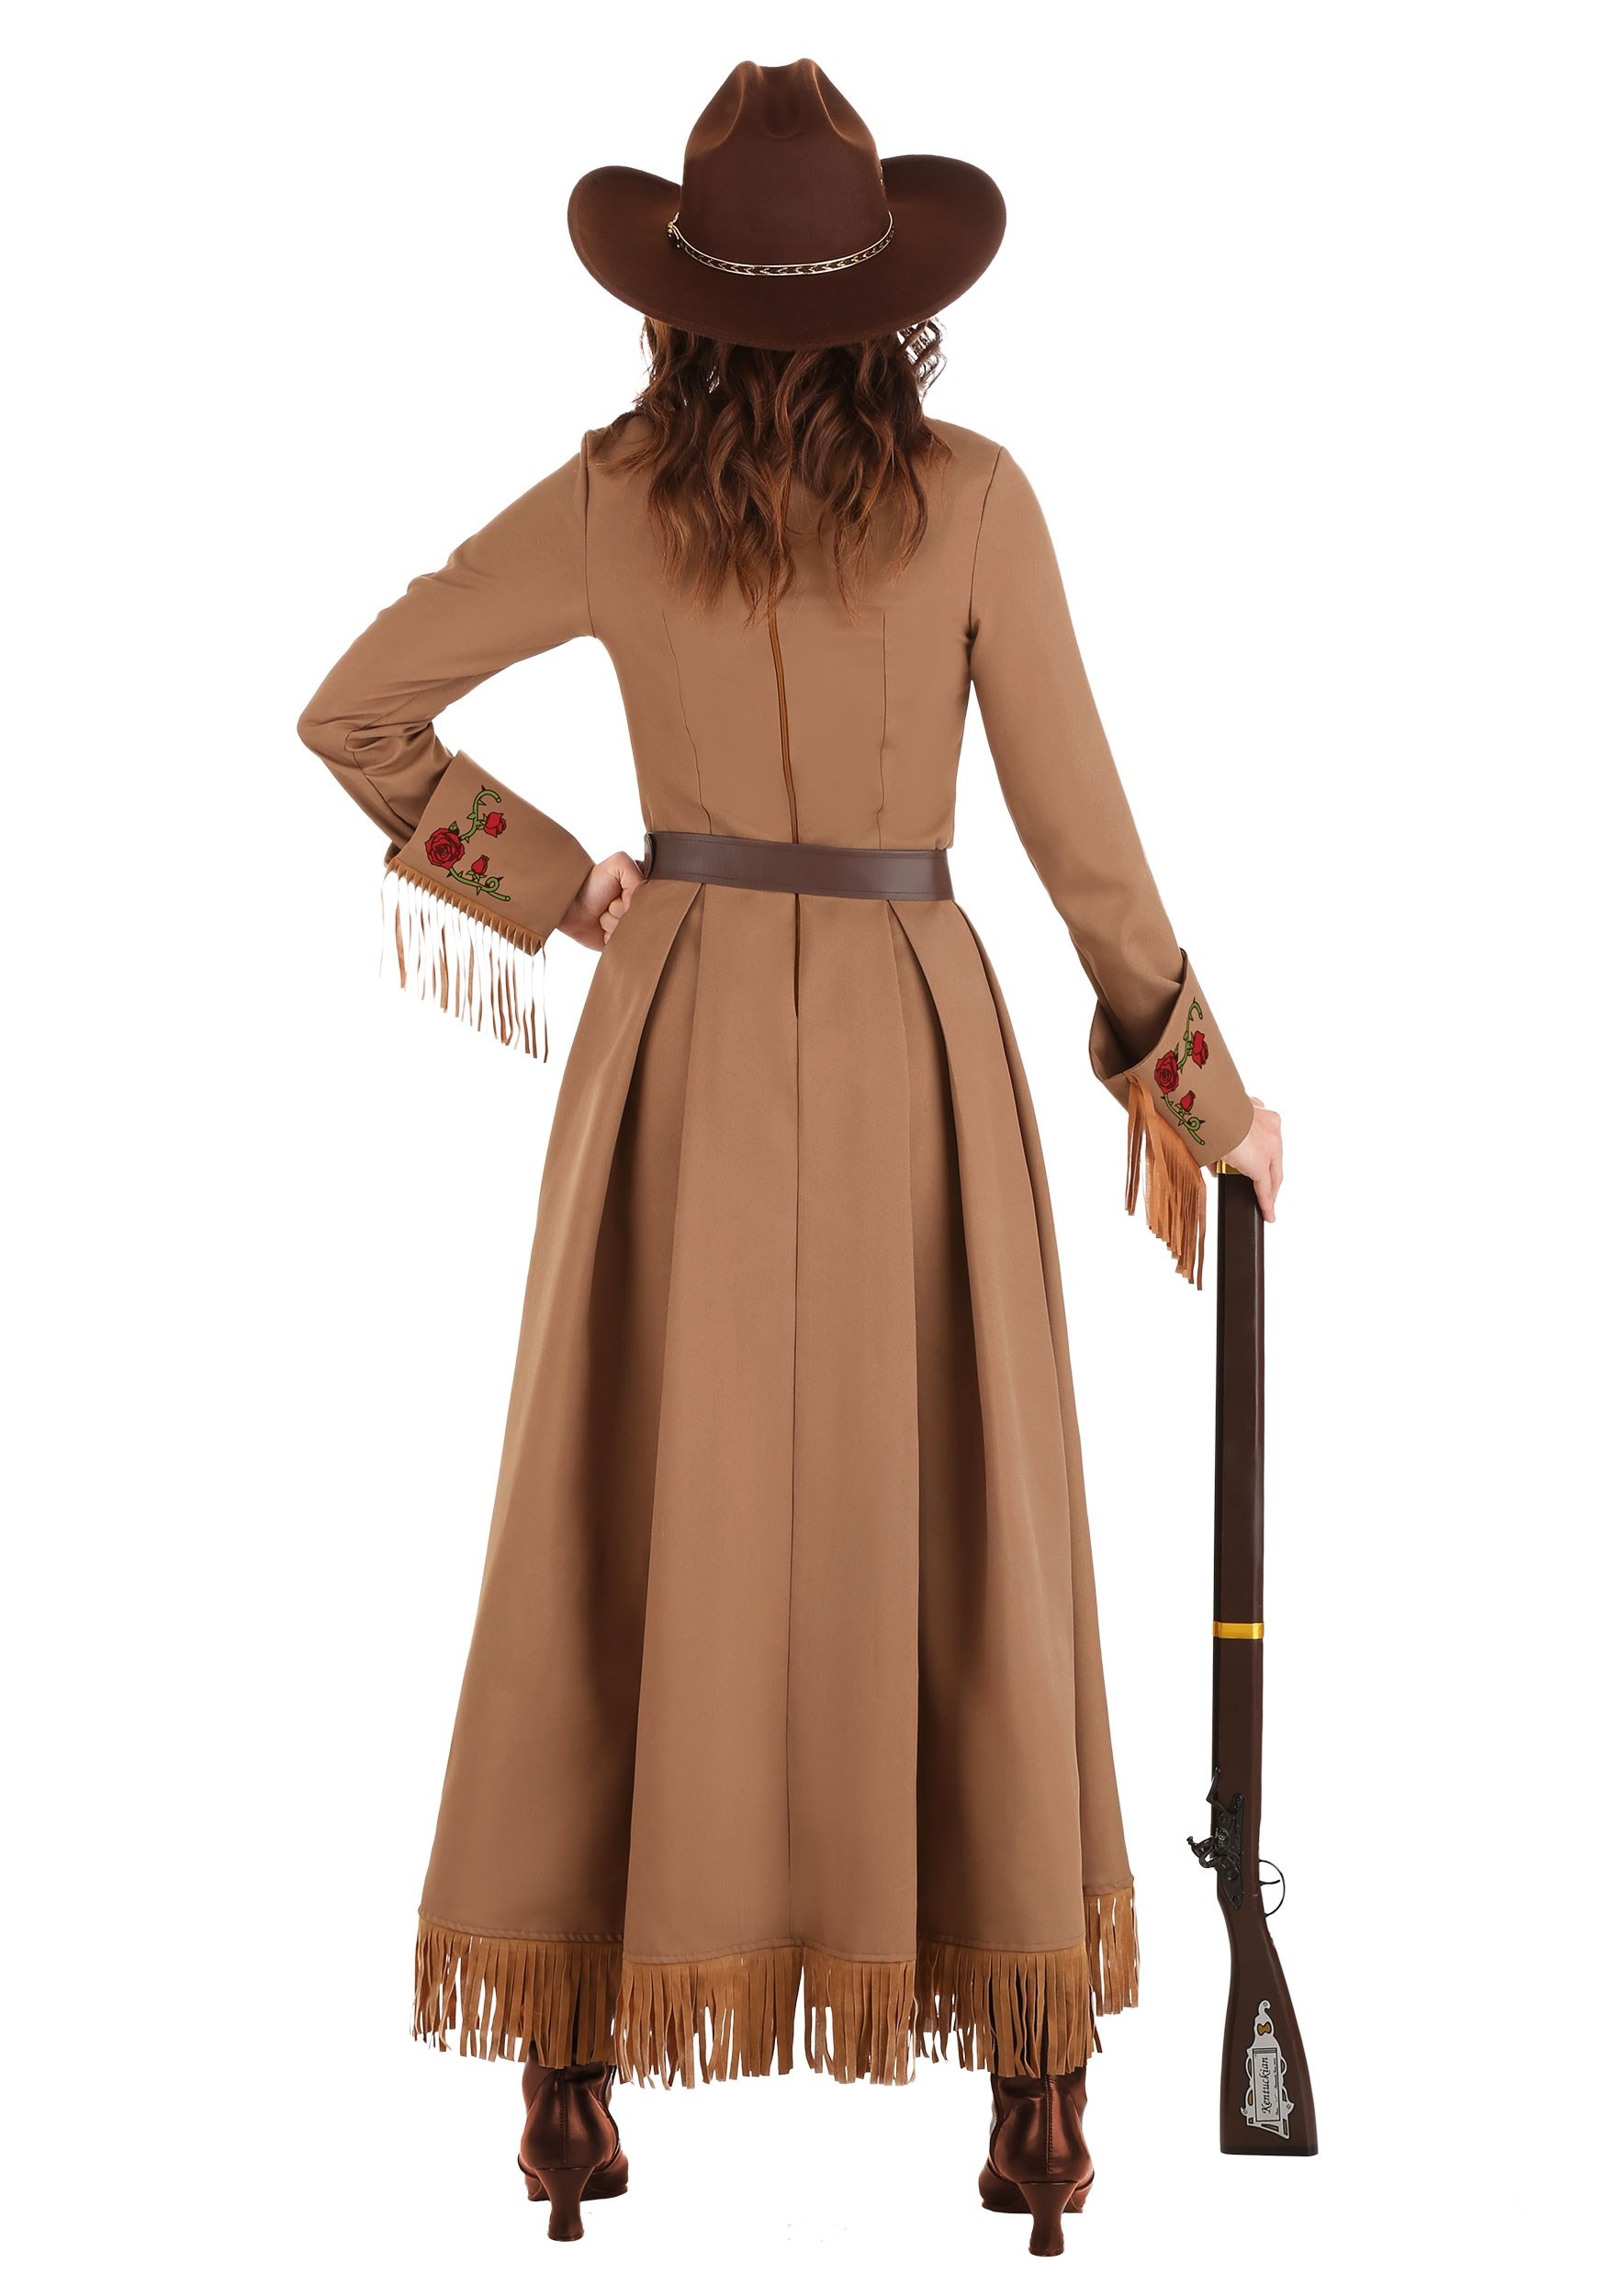 Annie Oakley Cowgirl Costume For Women , Historical Figure Costumes